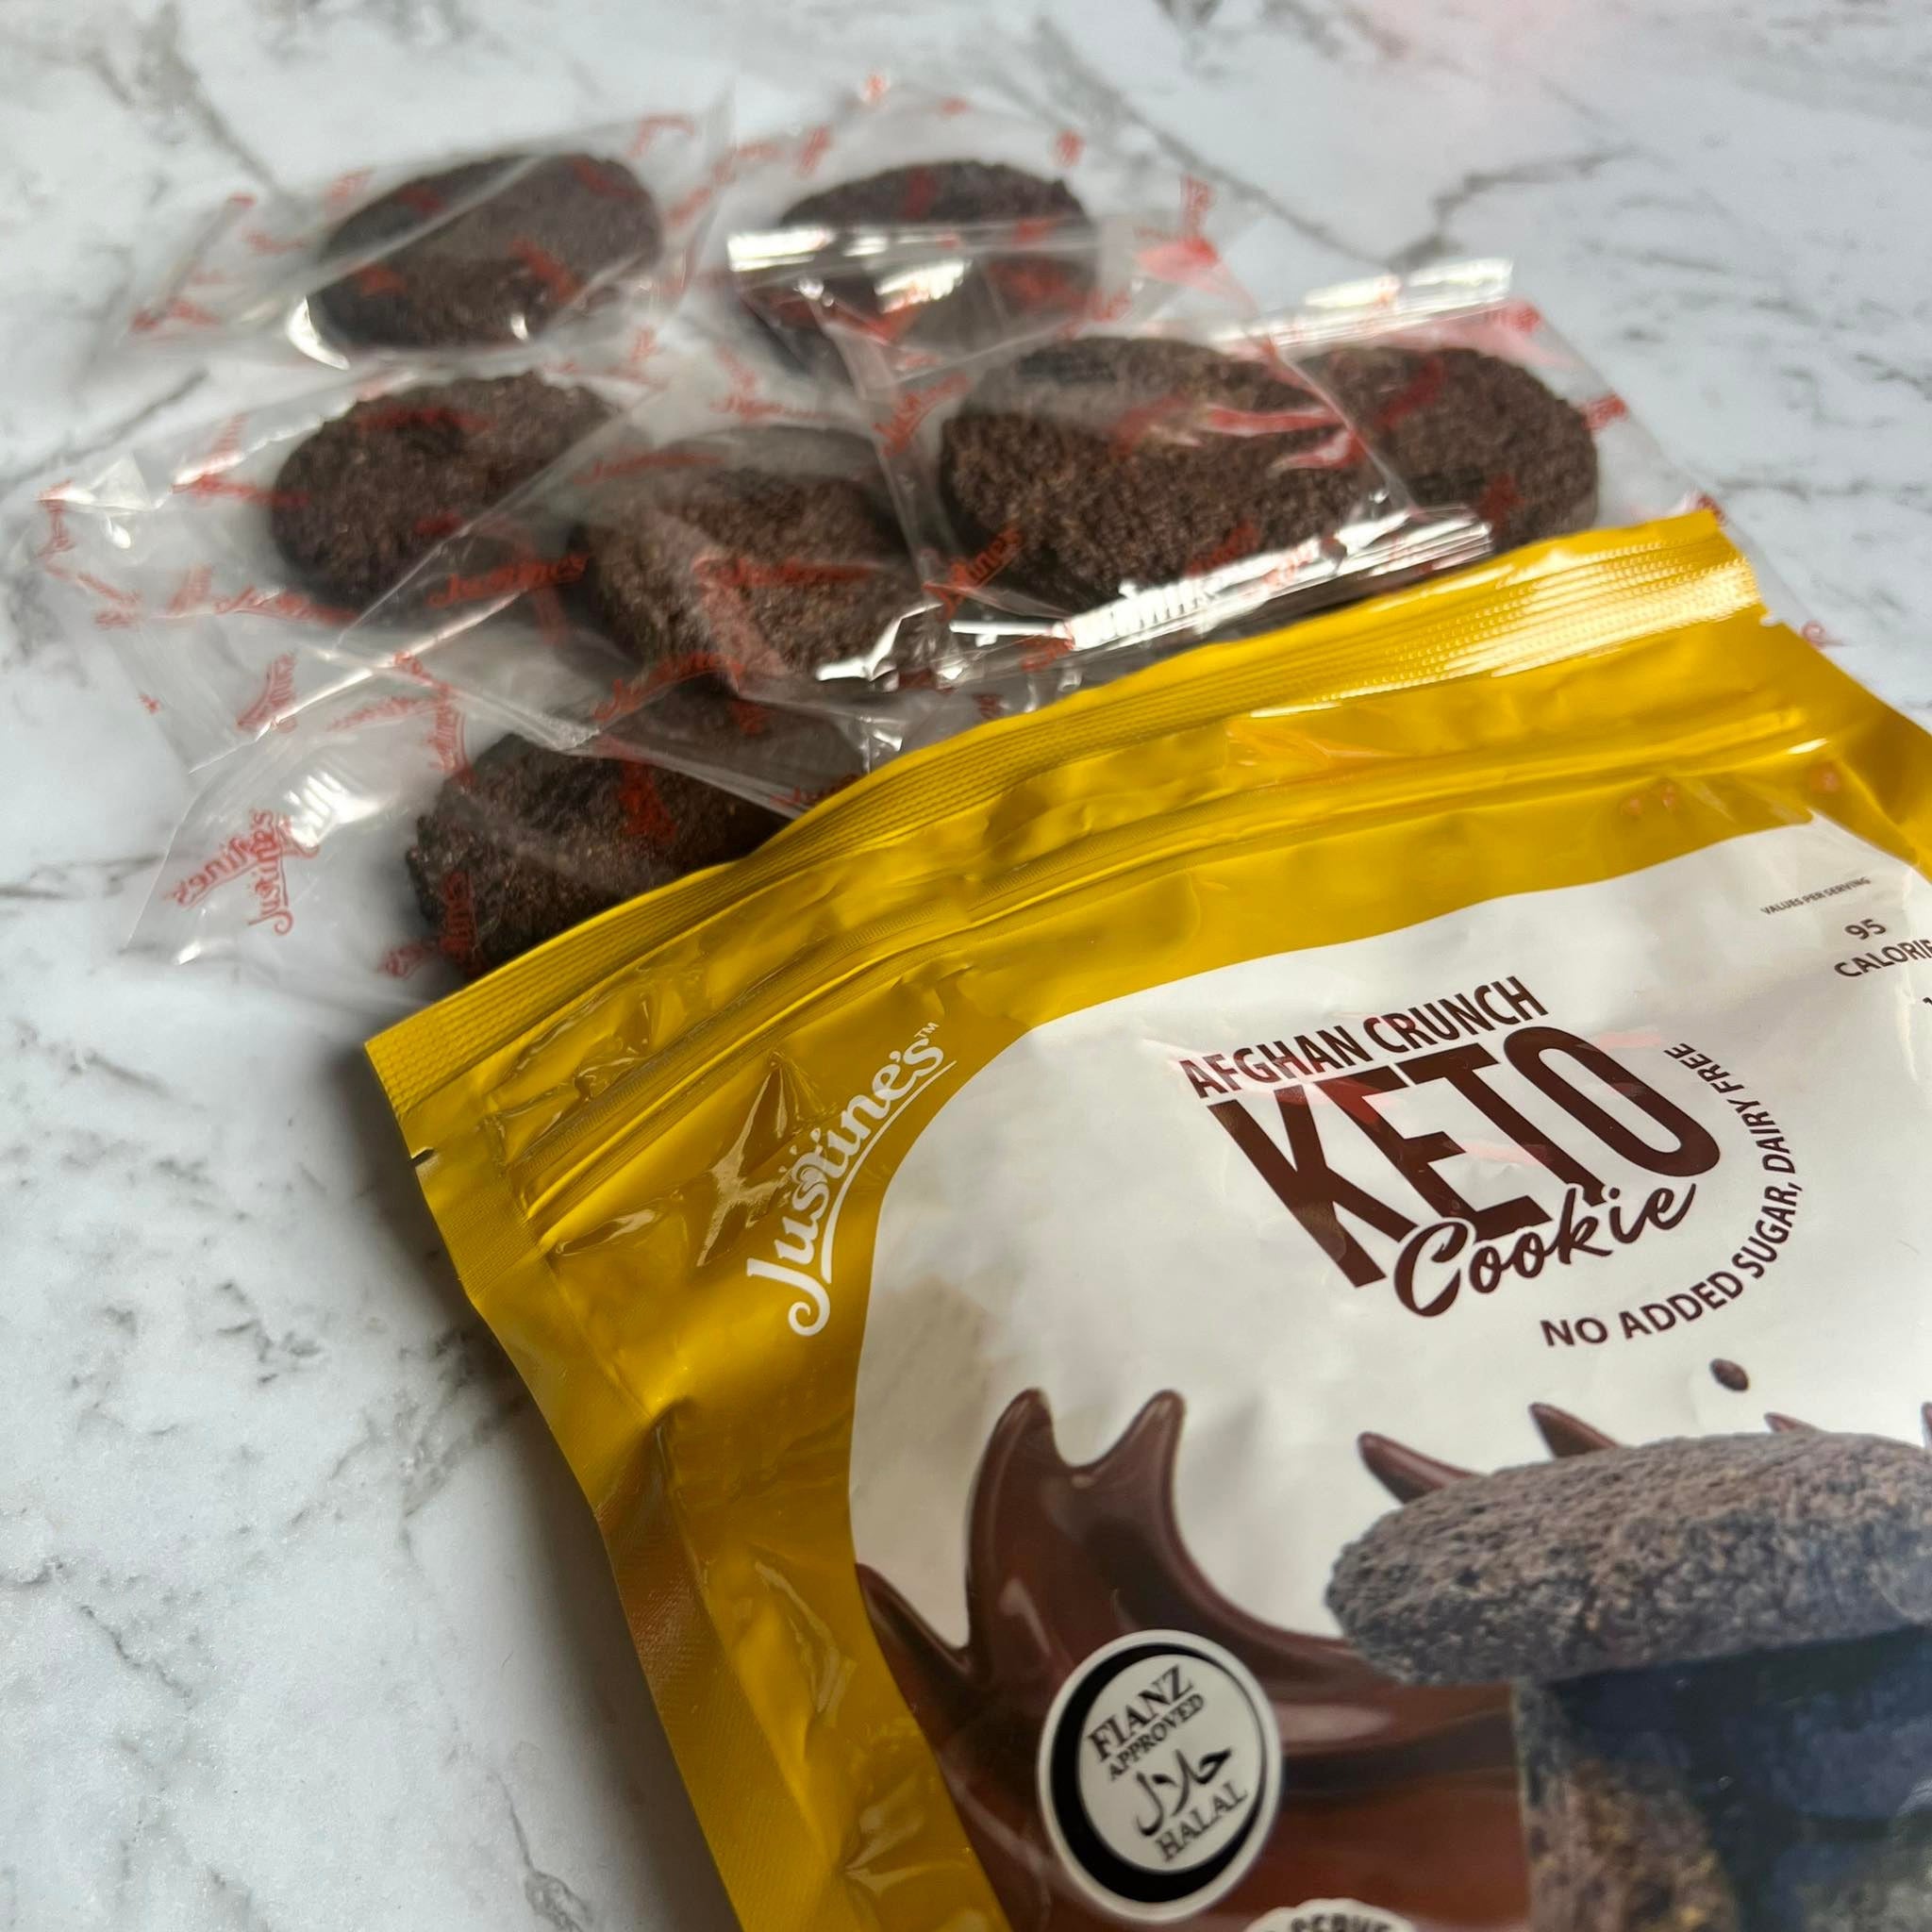 Justine's Keto Afghan Crunch Cookie pouch of 25g x 20